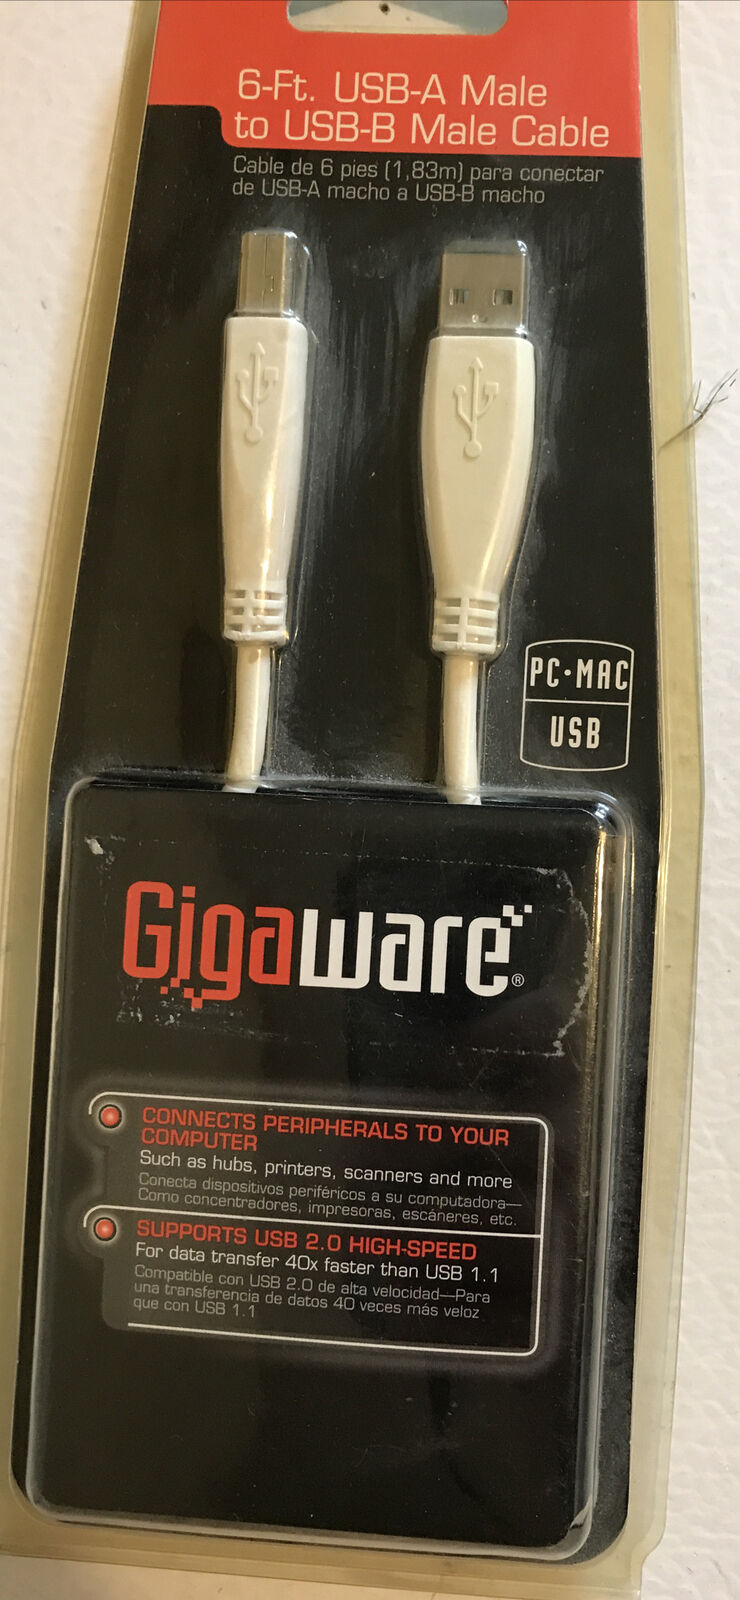 Gigaware 6 ft USB-A To USB-B Male Cable 26 - New Sealed